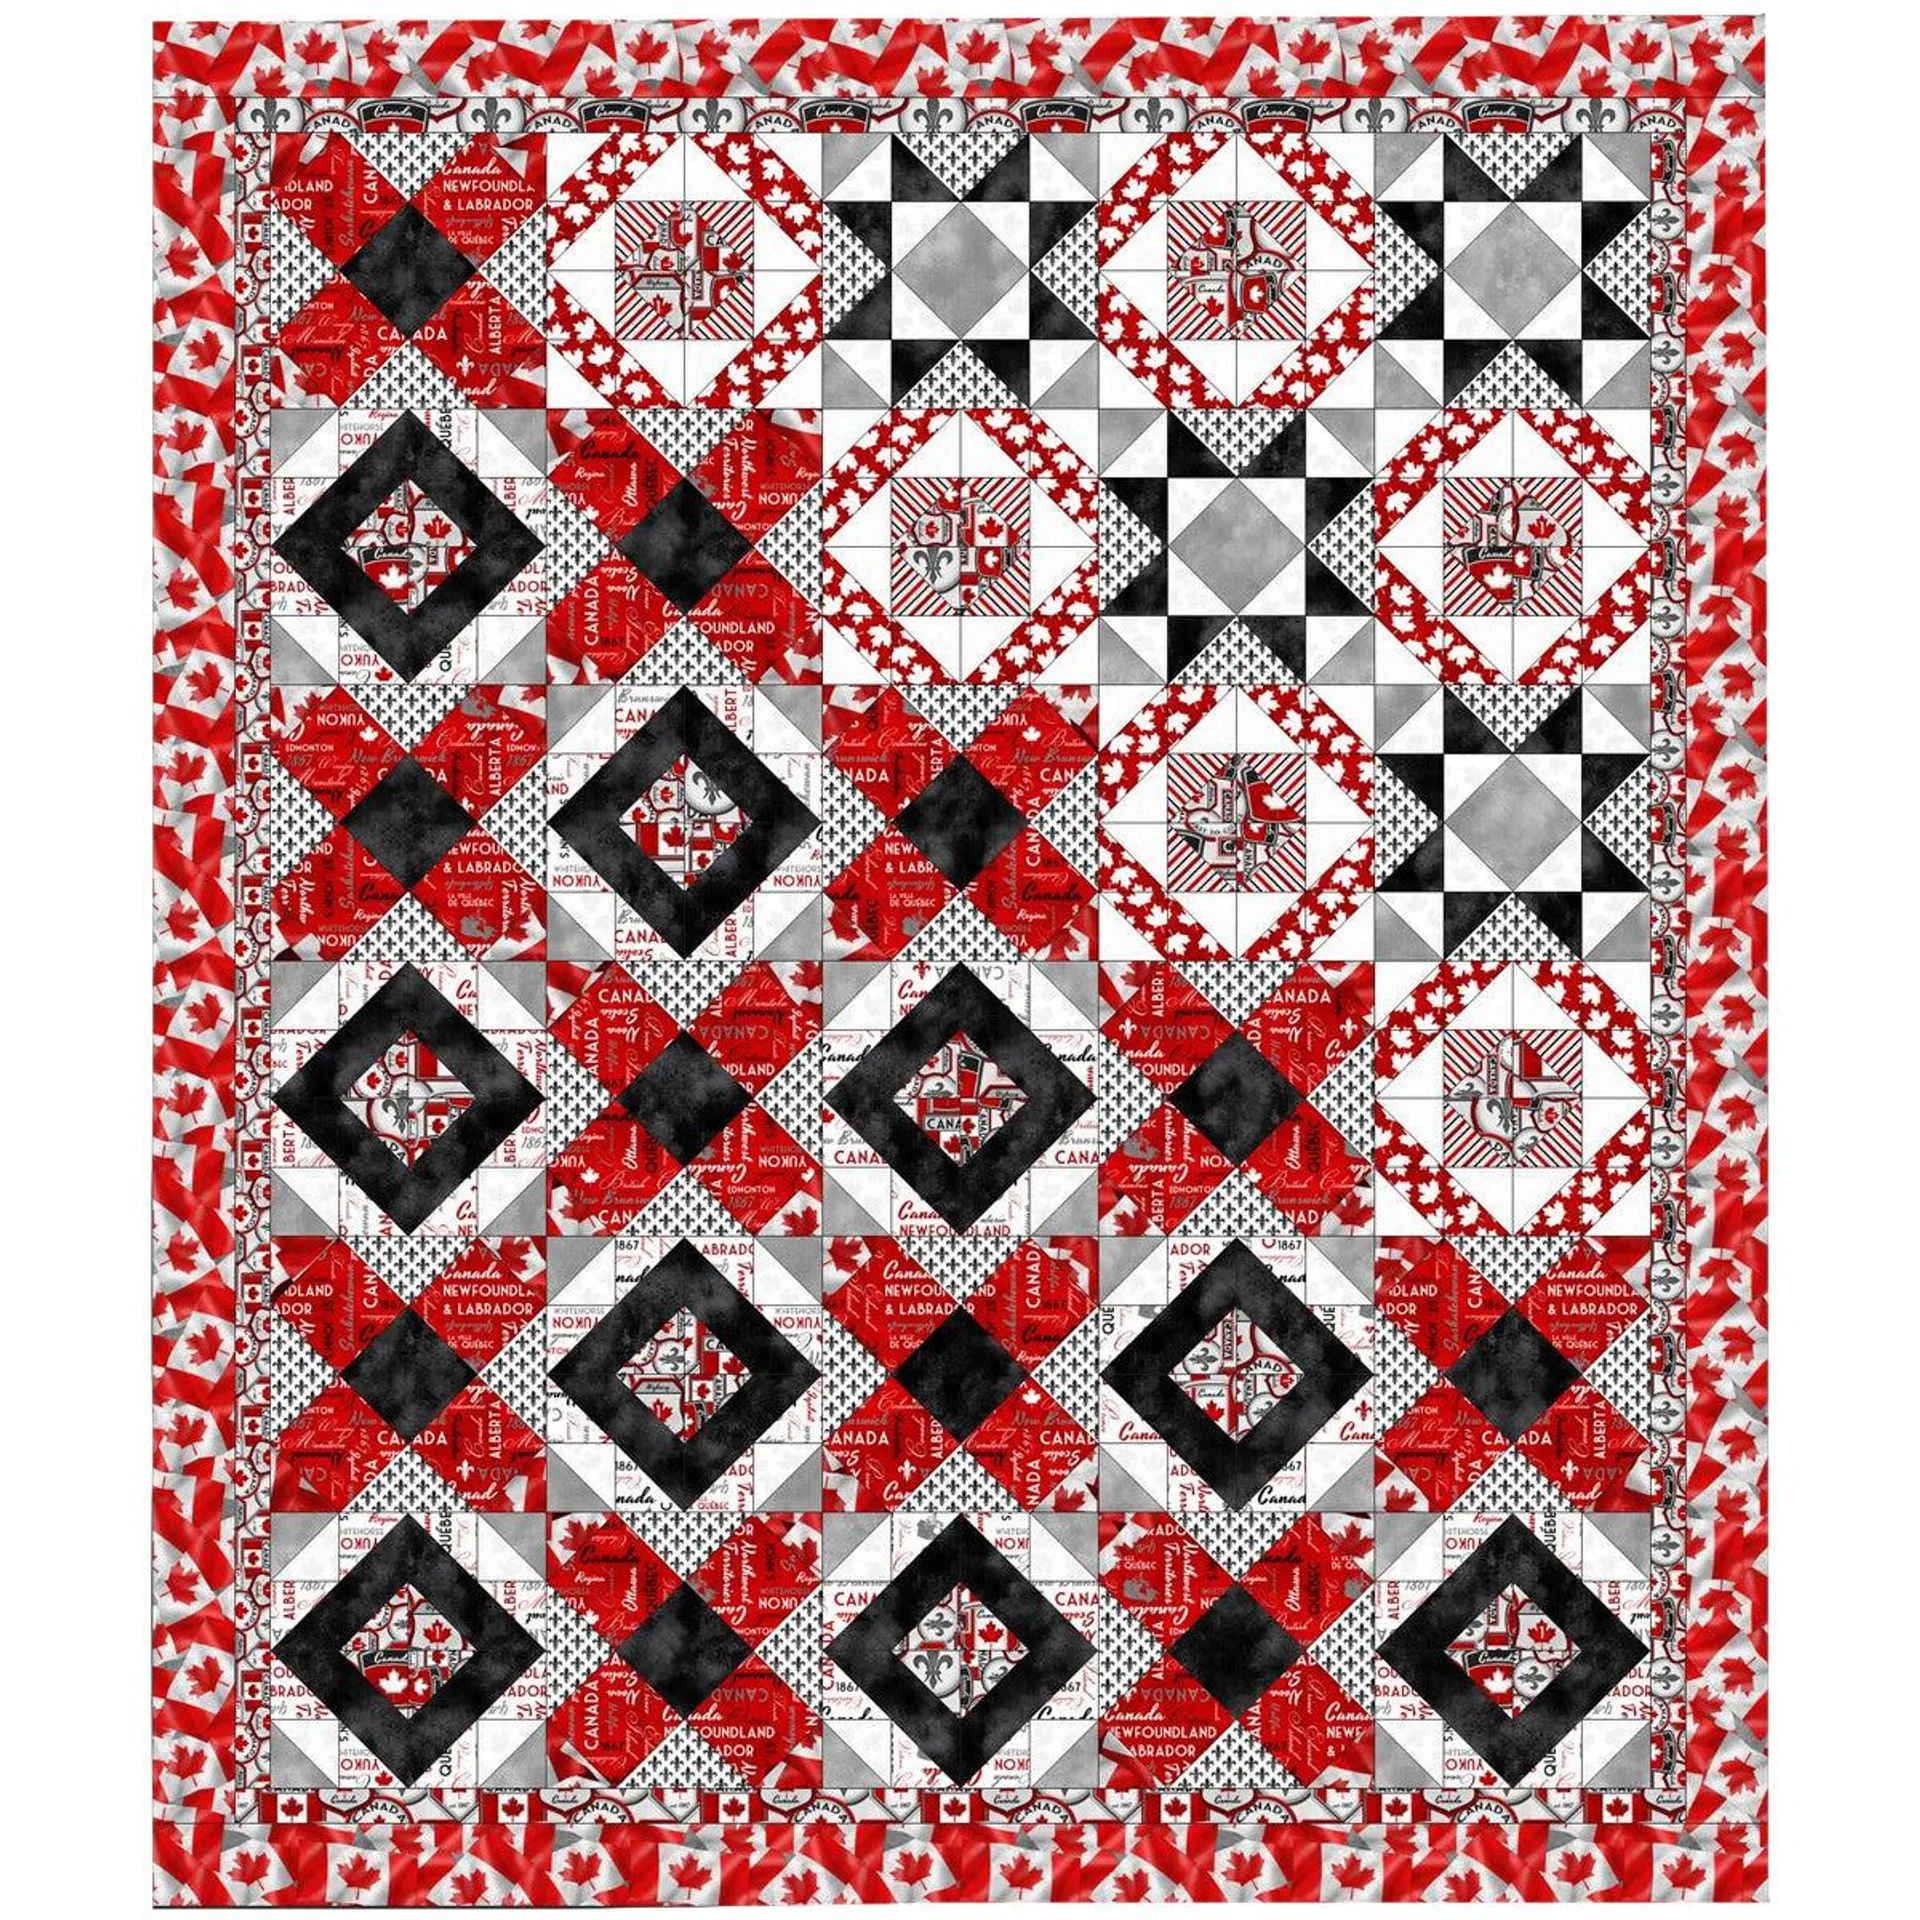 Cador Canadianisms Town & Country Quilt Kit - 58 1/2" x 68 1/2"